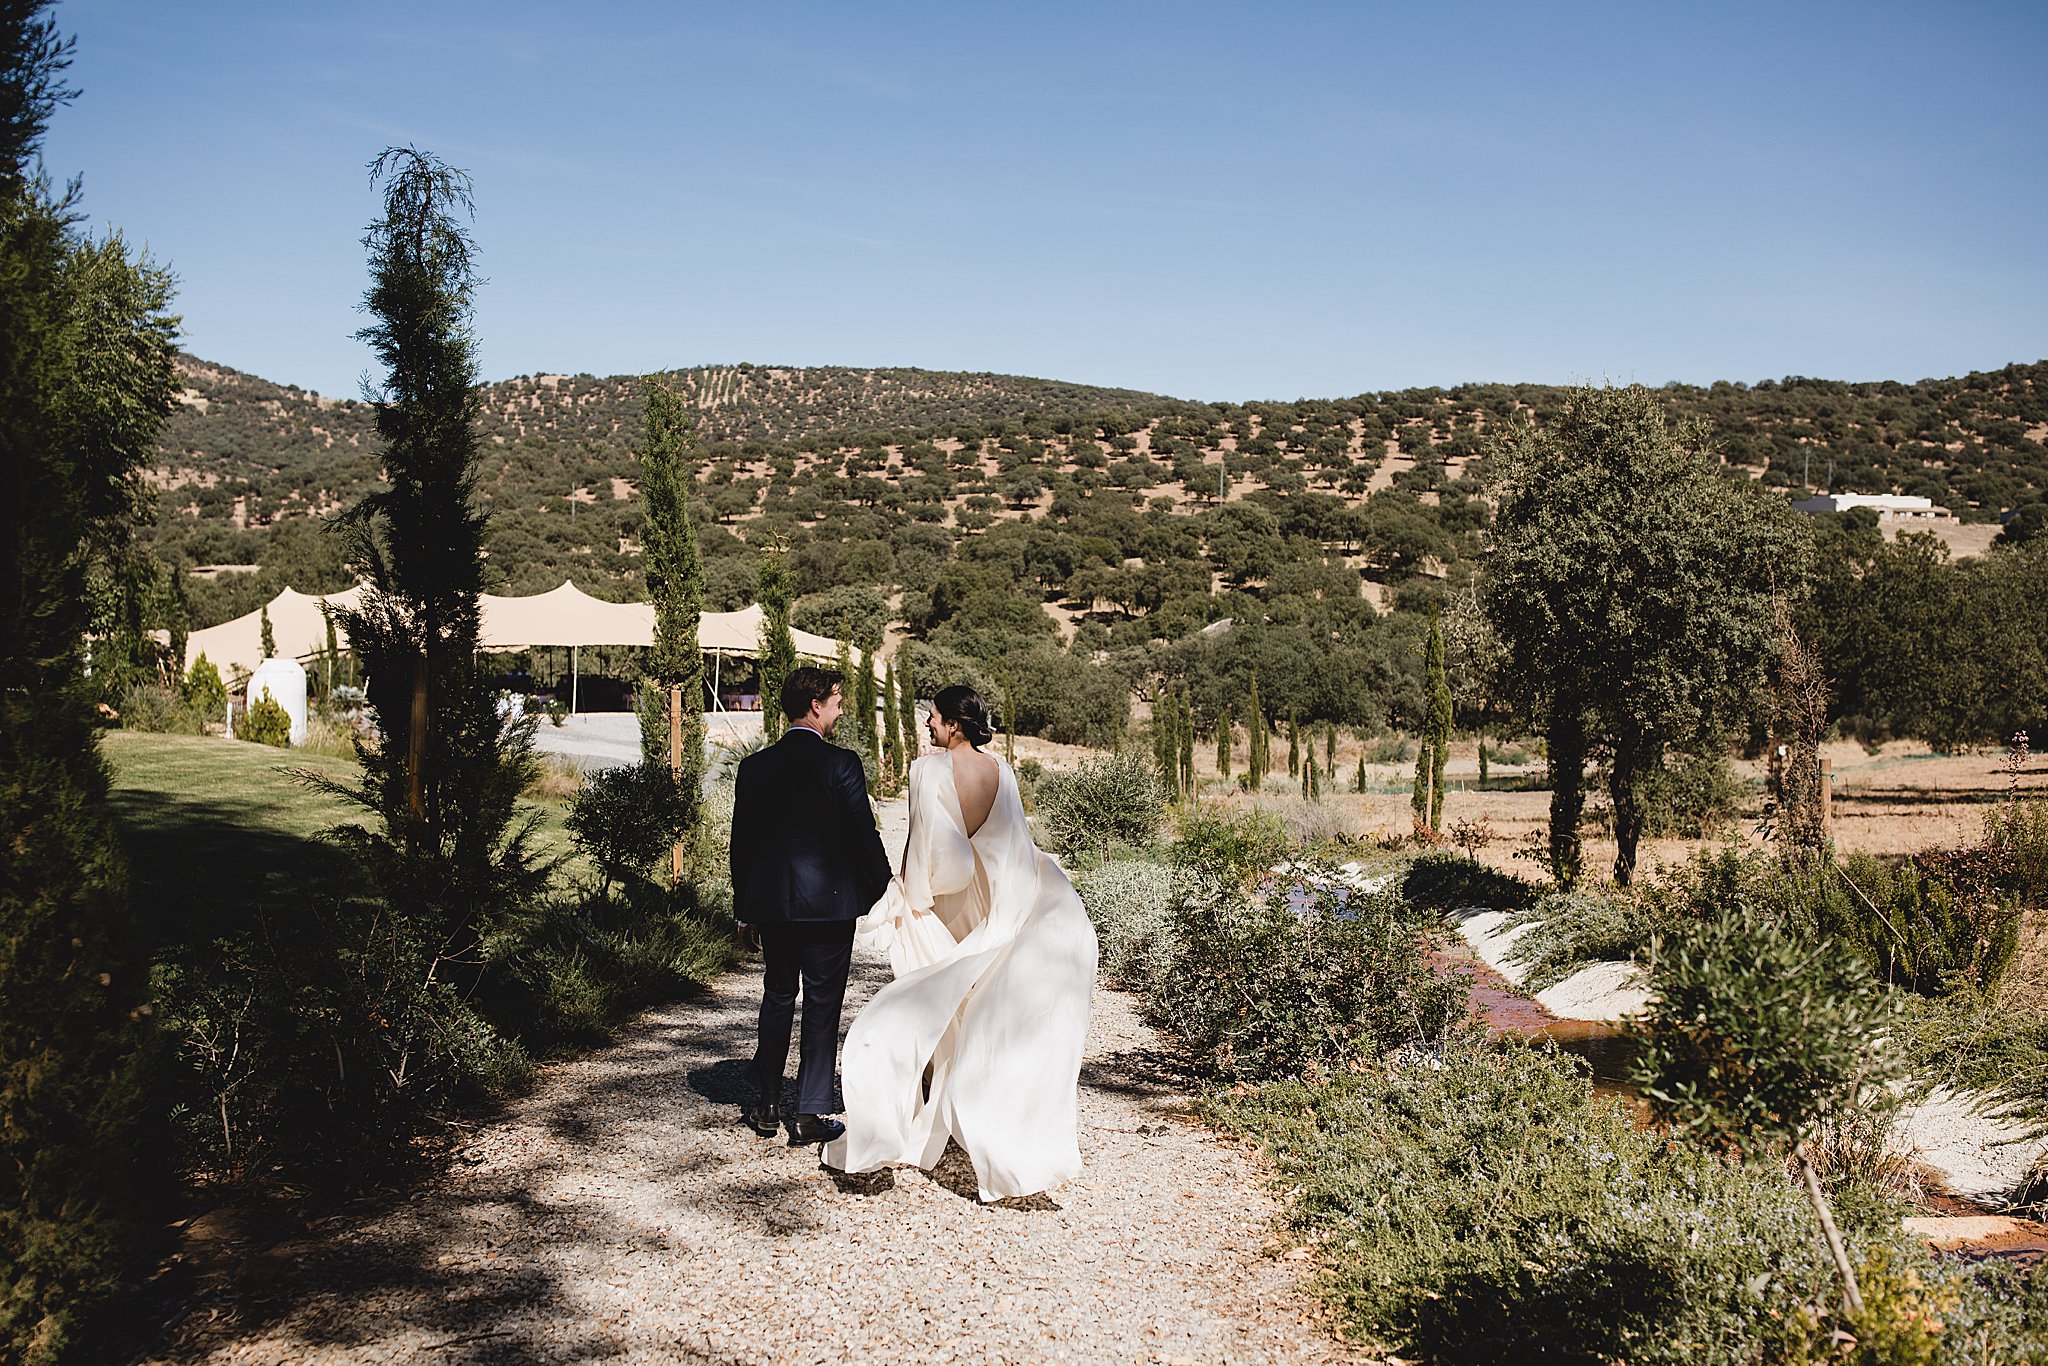 bride & groom walking outside with mountains in the background at ceremony setup at destination wedding in córdoba spain photographed by juliana montane photography